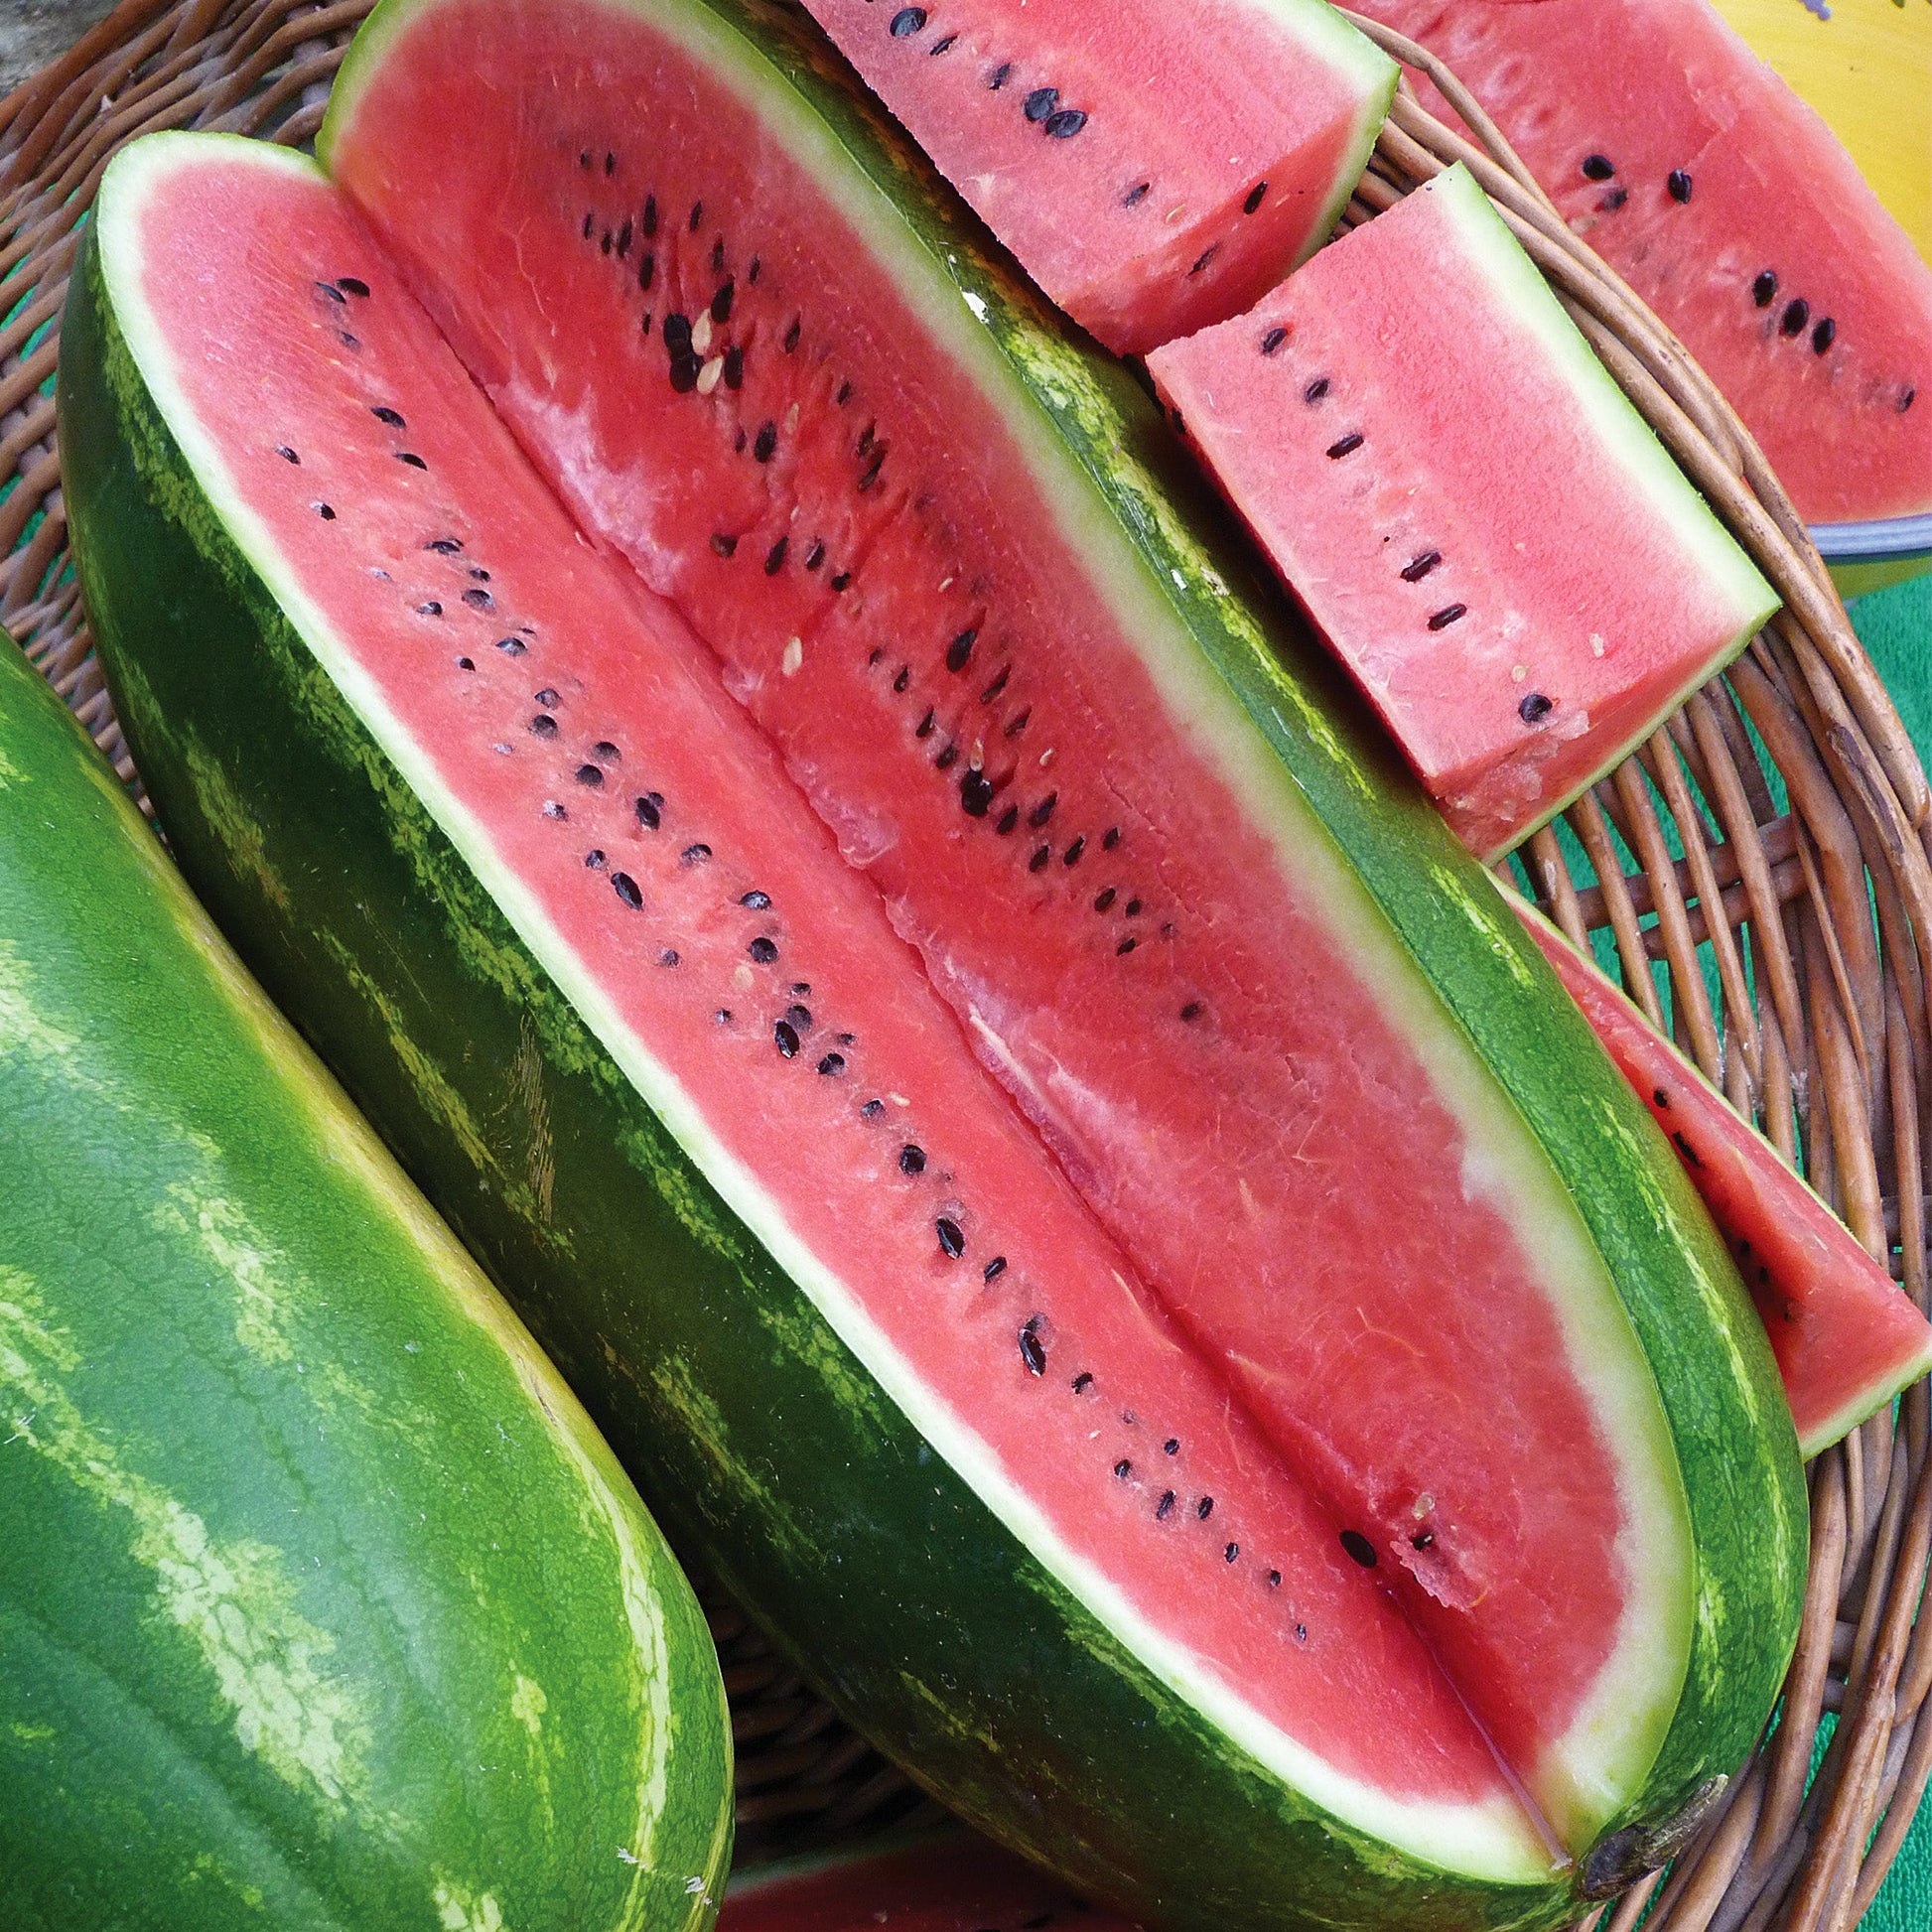 Jubilee Watermelon seeds_picture shows matured and harvested elongated jubilee watermelon.